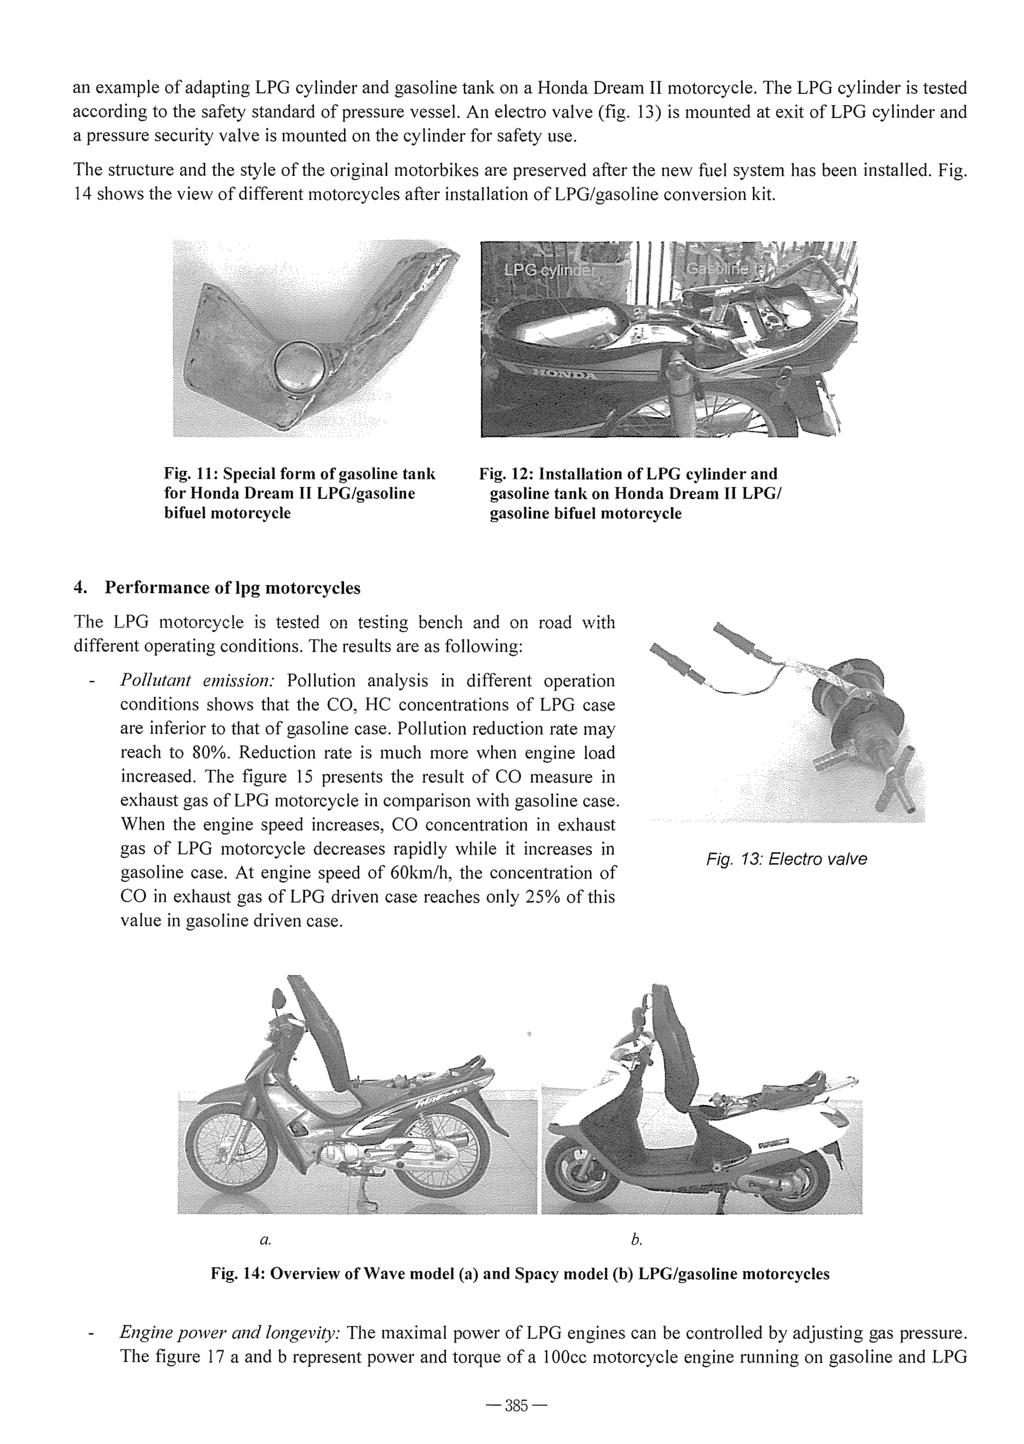 an example of adapting LPG cylinder and gasoline tank on a Honda Dream II motorcycle. The LPG cylinder is tested according to the safety standard of pressure vessel. An electro valve (fig.